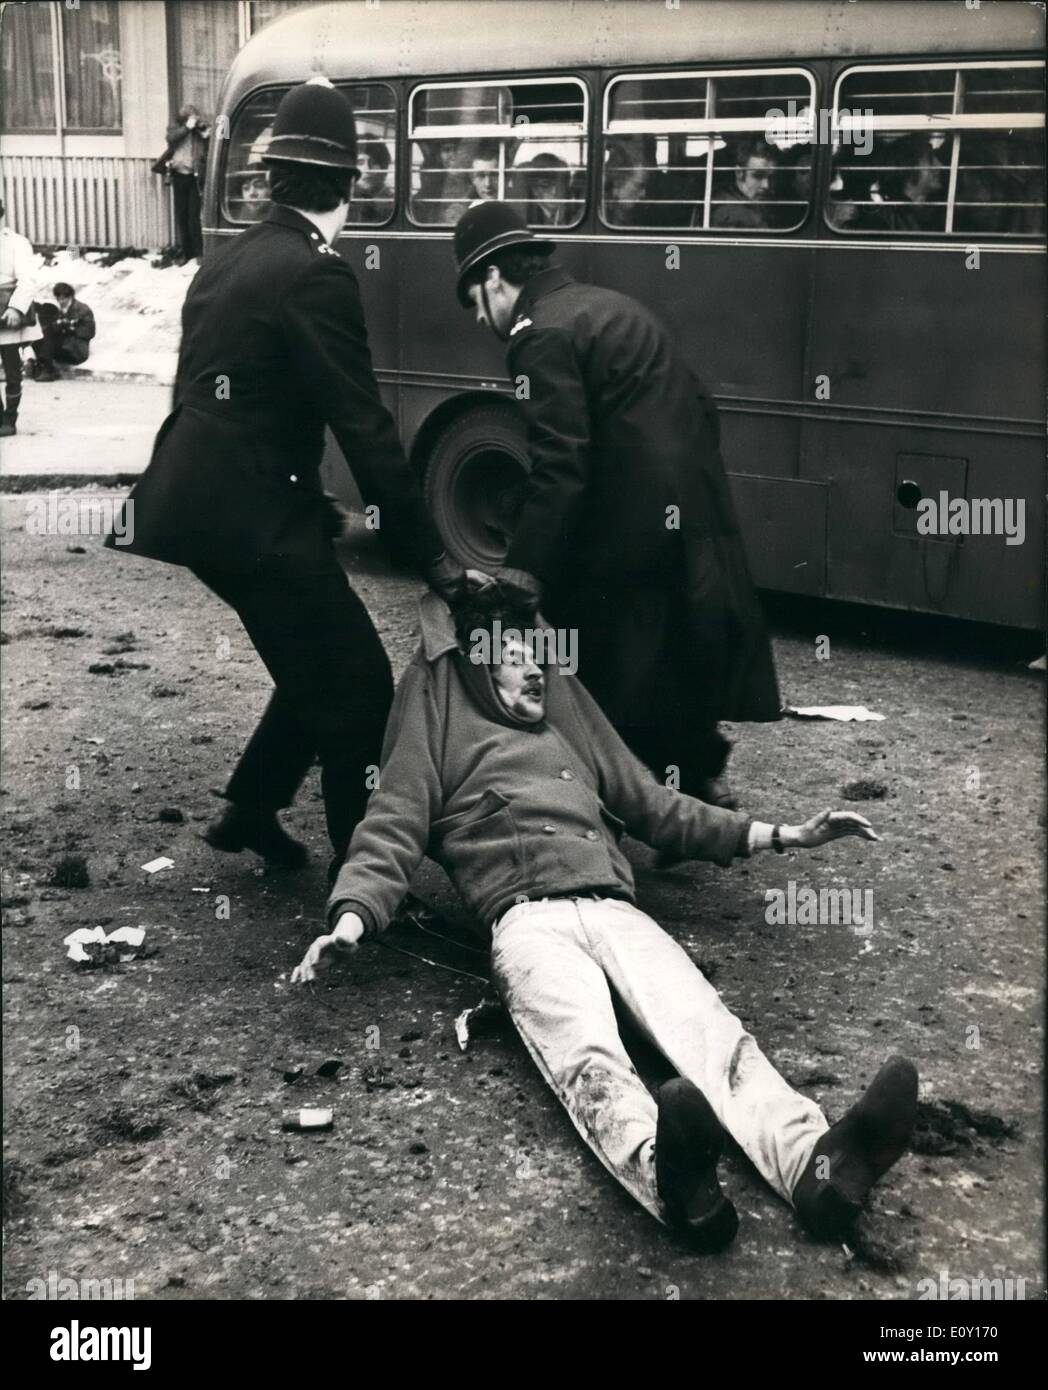 Mar. 03, 1968 - Vietnam Battle: Two policemen drag off a young demonstrator in the Battle of Vietnam in London's Grosvenor Square outside the U.S. Embassy today when thousands of demonstrators besieged the Embassy protesting against the Vietnam war. The Protestors fought with the police and many arrests were made. Stock Photo